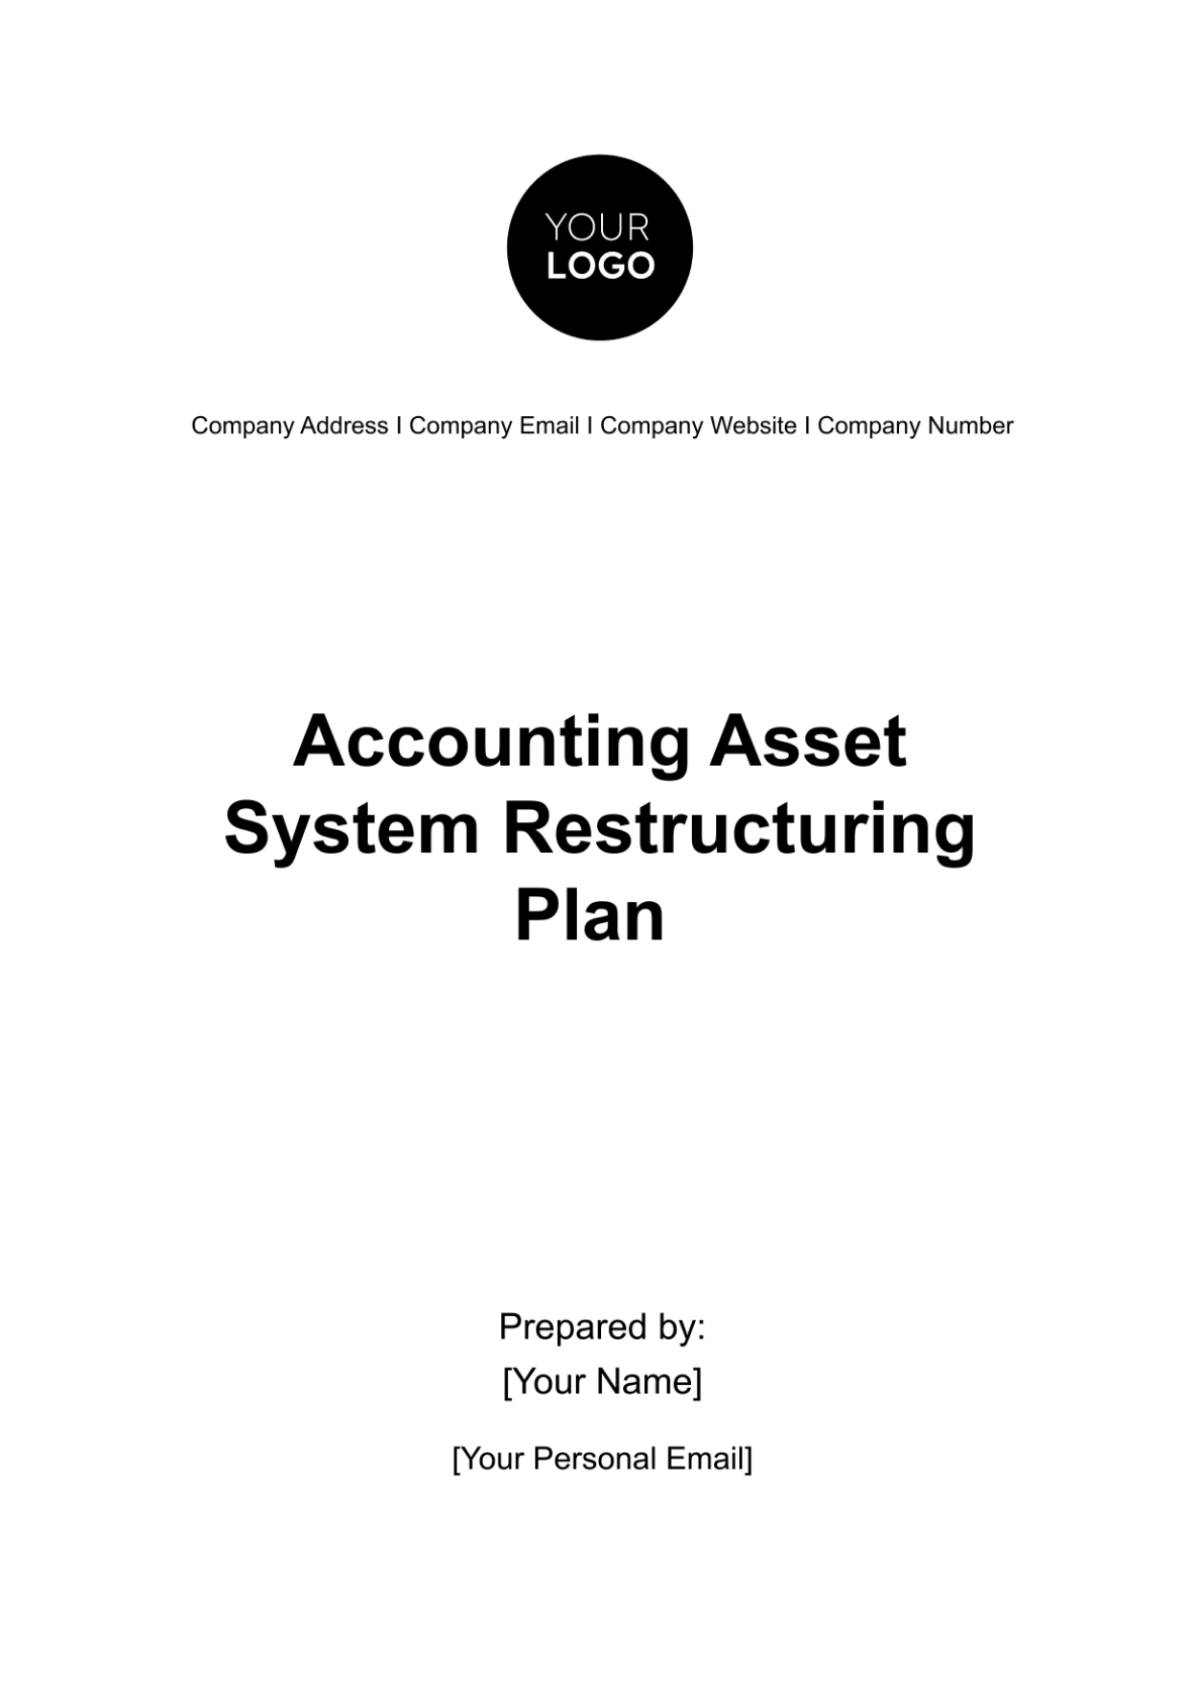 Accounting Asset System Restructuring Plan Template